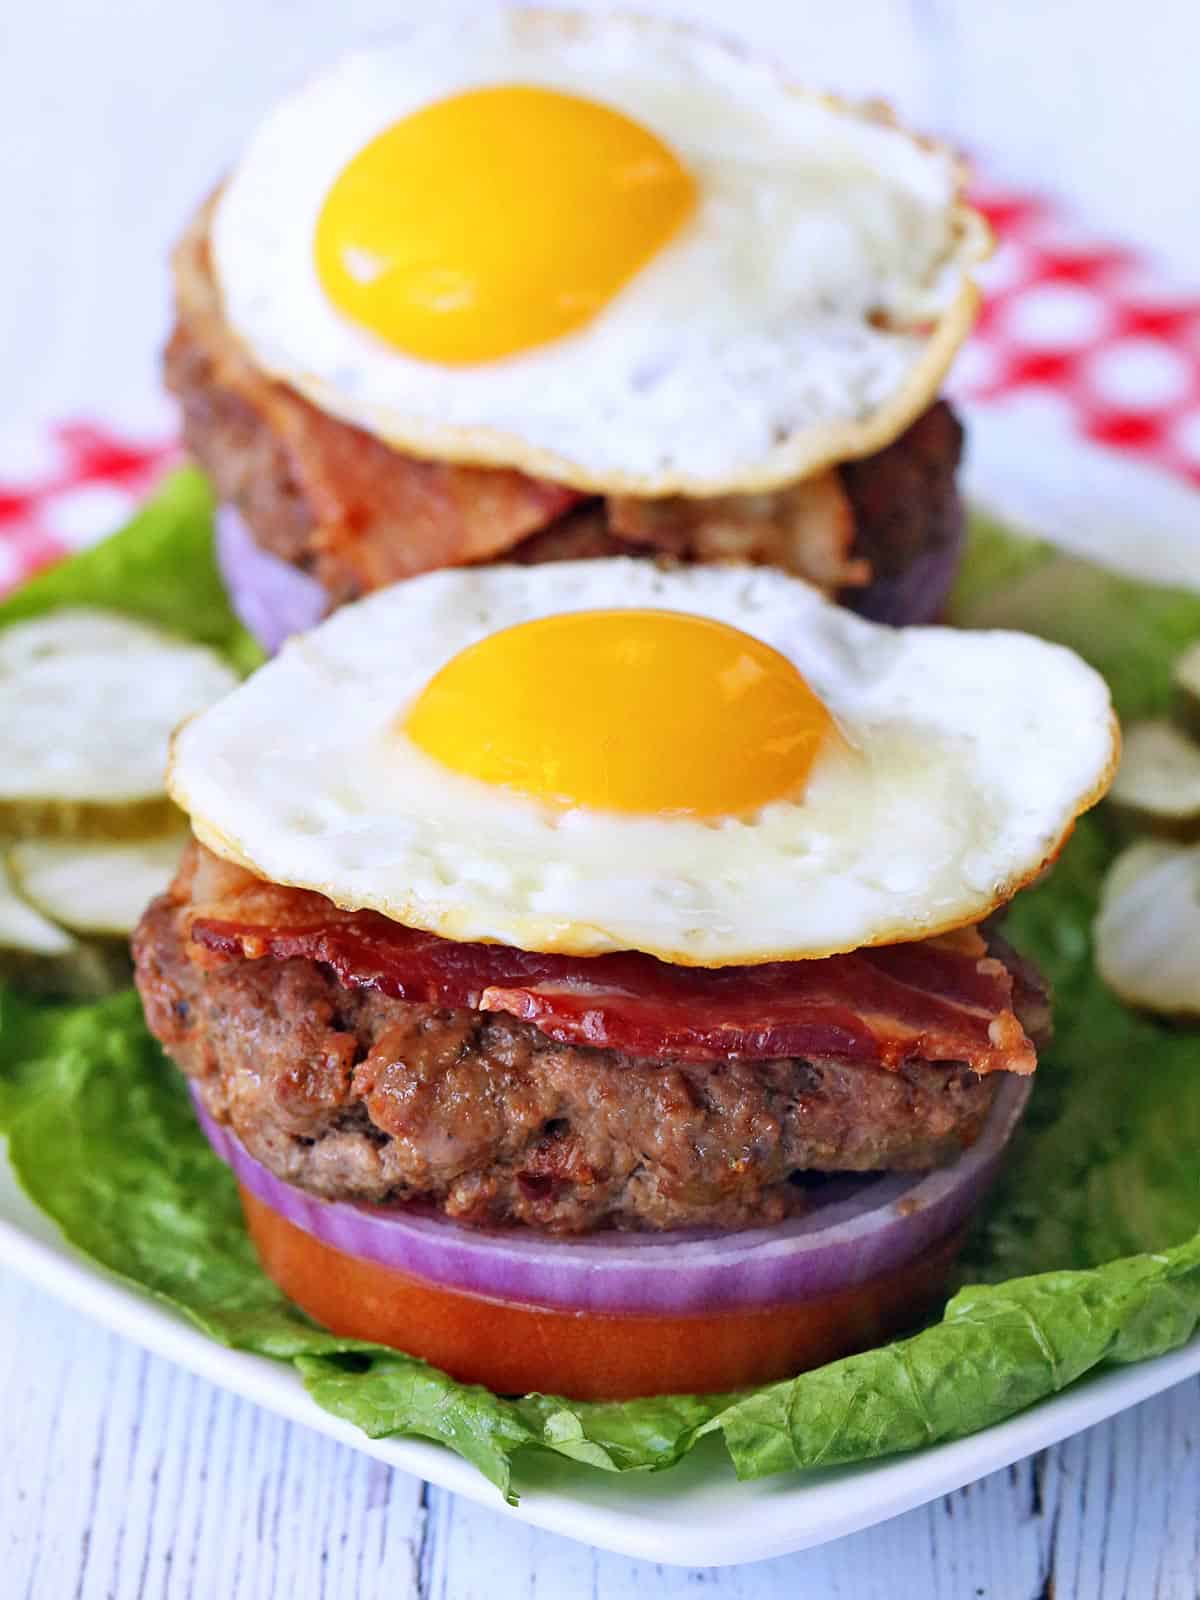 Two bacon burgers topped with fried eggs.